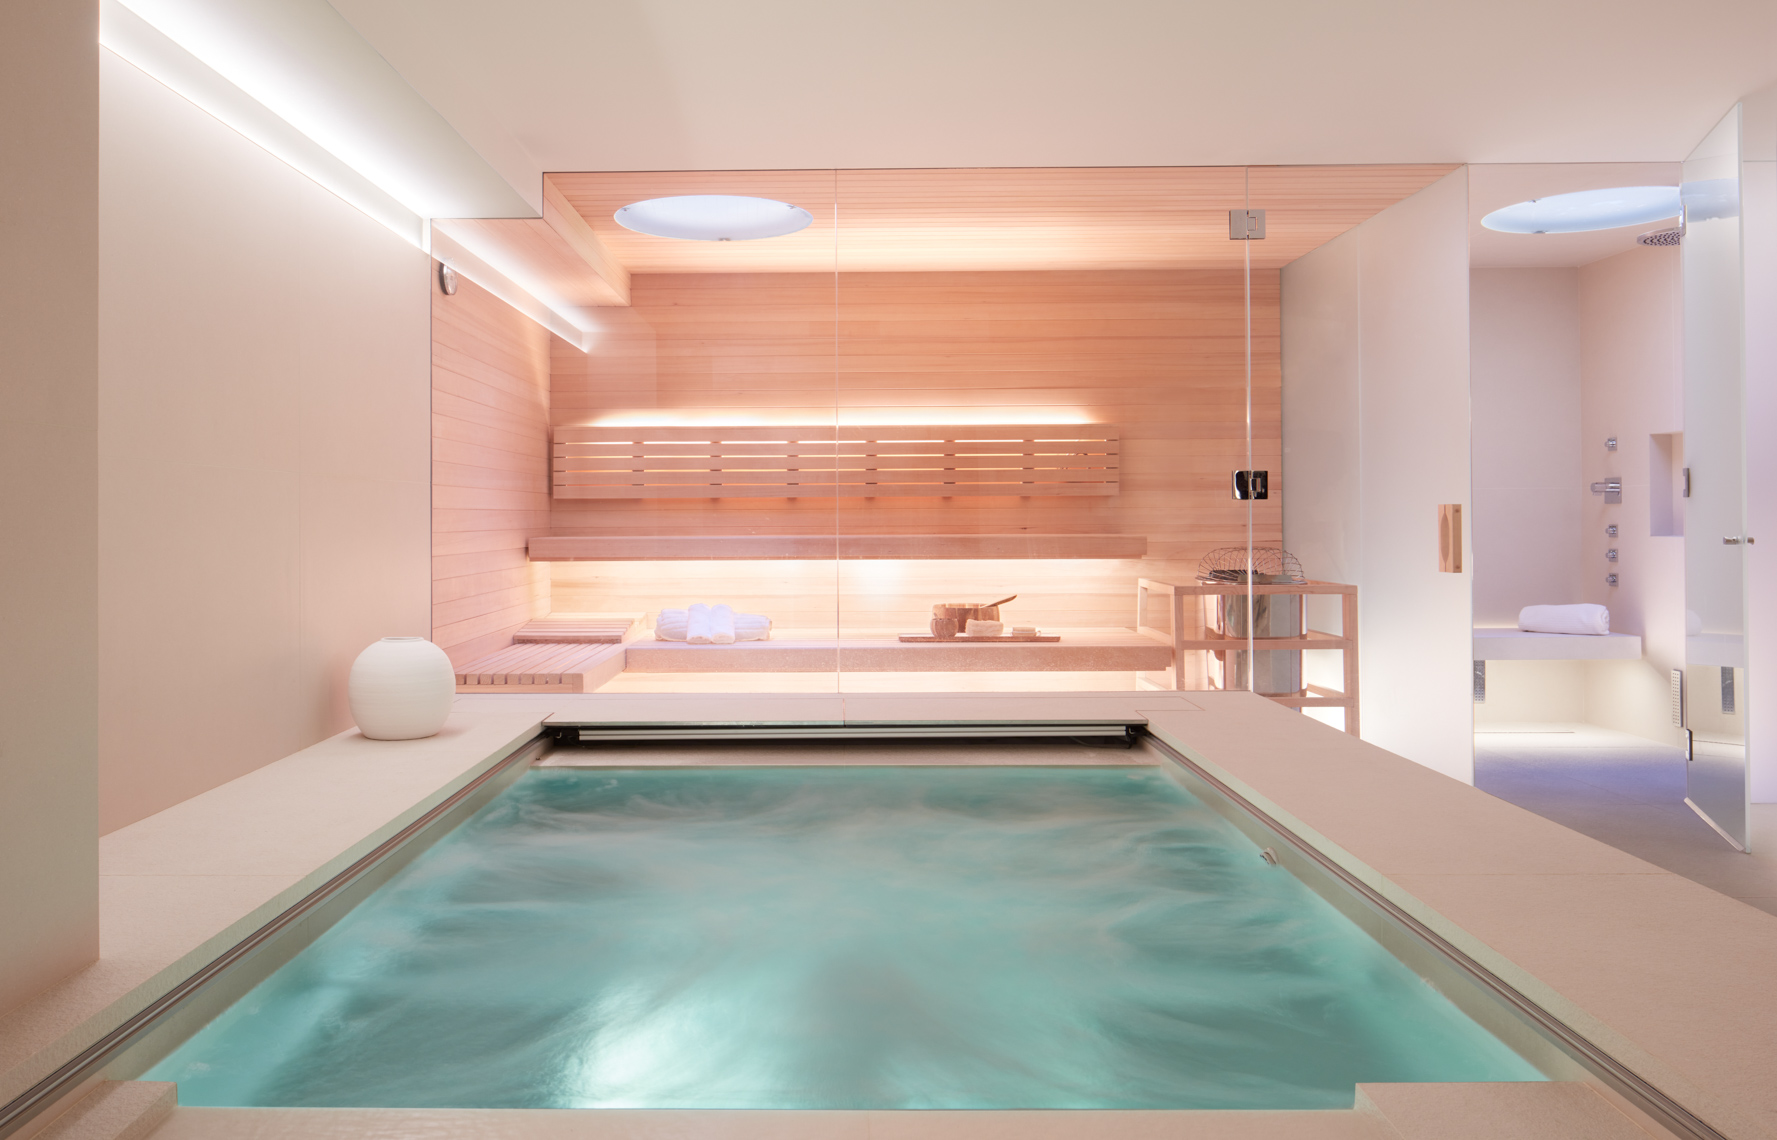 High end ultra luxury indoor spa with jacuzzi pool